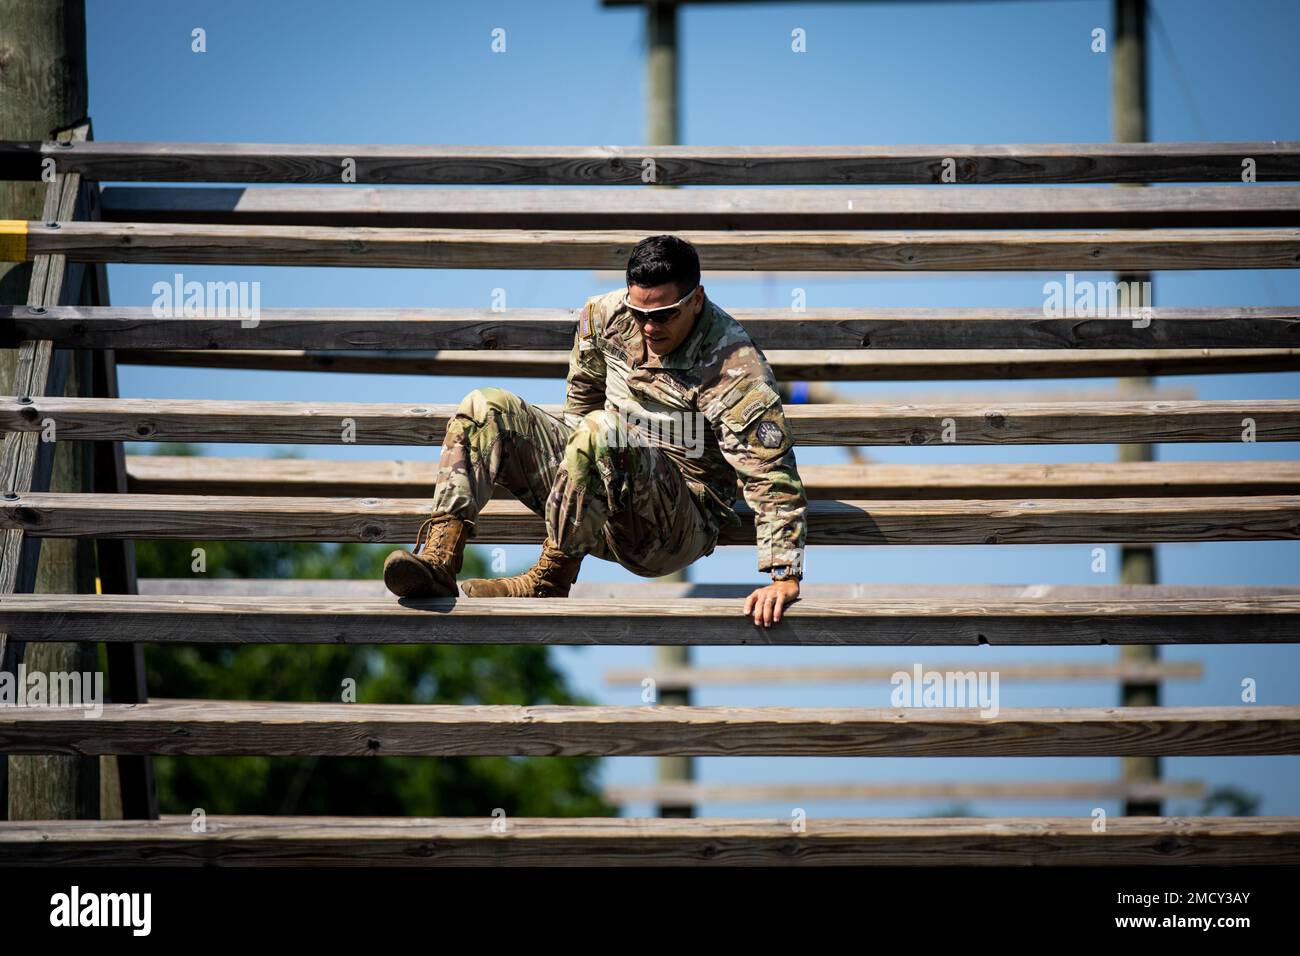 Cpt. John Linter, assigned with 48th Chemical Brigade, pictured while navigating an obstacle course in the Best Warrior and Best Squad Competition hosted by 20th Chemical, Biological, Radiological, Nuclear, and Explosives (CBRNE) Command at Fort Indiantown Gap, Pennsylvania, July 11, 2022. The 20th CBRNE Command’s Best Squad Competition and Best Warrior Competition is a single event used to select the best Noncommissioned Officer of the Year and Soldier of the Year from Soldiers within the command and its major subordinate commands. Stock Photo